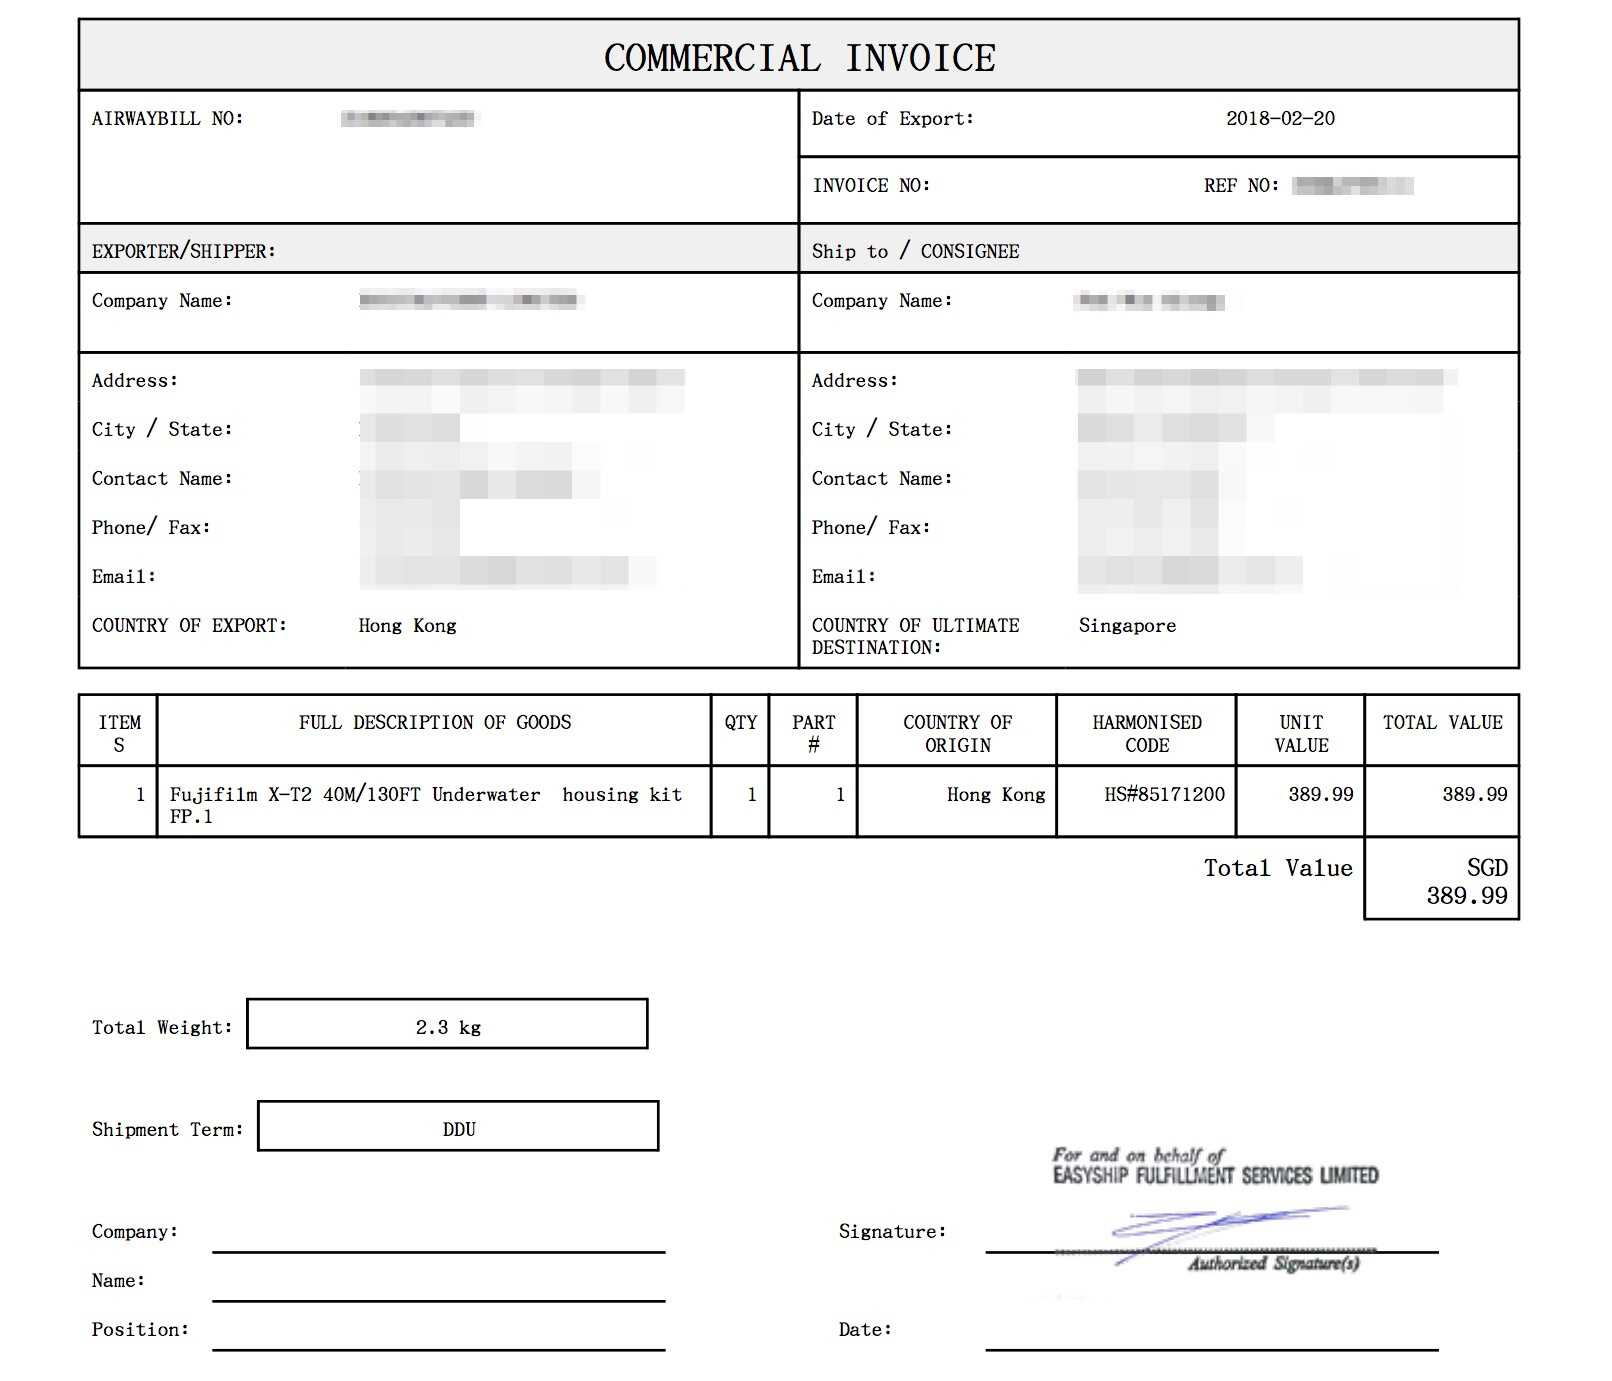 Commercial Invoices Explained | Easyship Blog In International Shipping Invoice Template